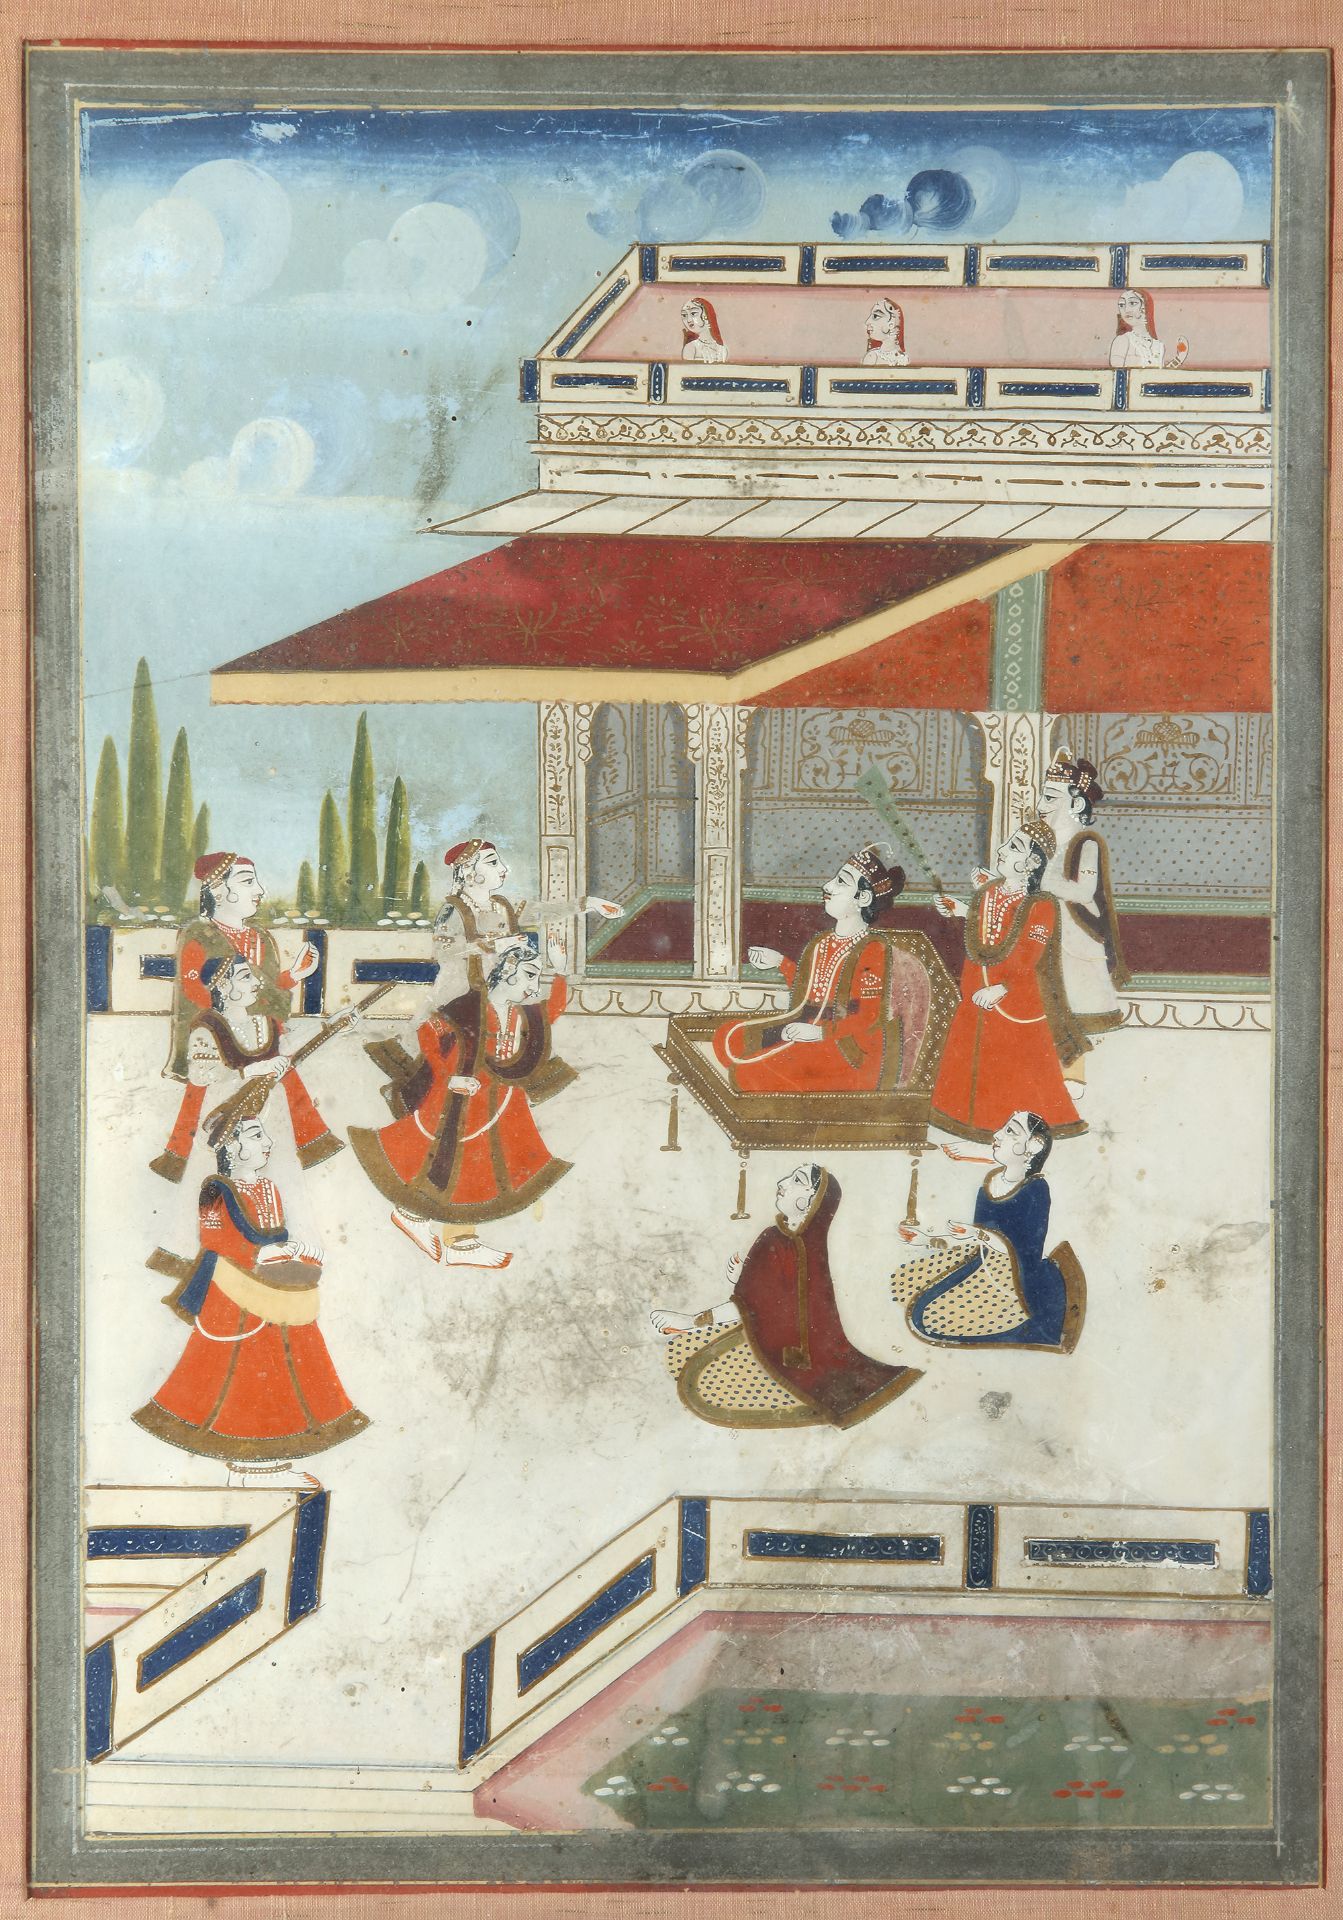 A PRINCE ENTERTAINED IN PALACE COURTYARD, JAIPUR, RAJASTHAN,19TH CENTURY